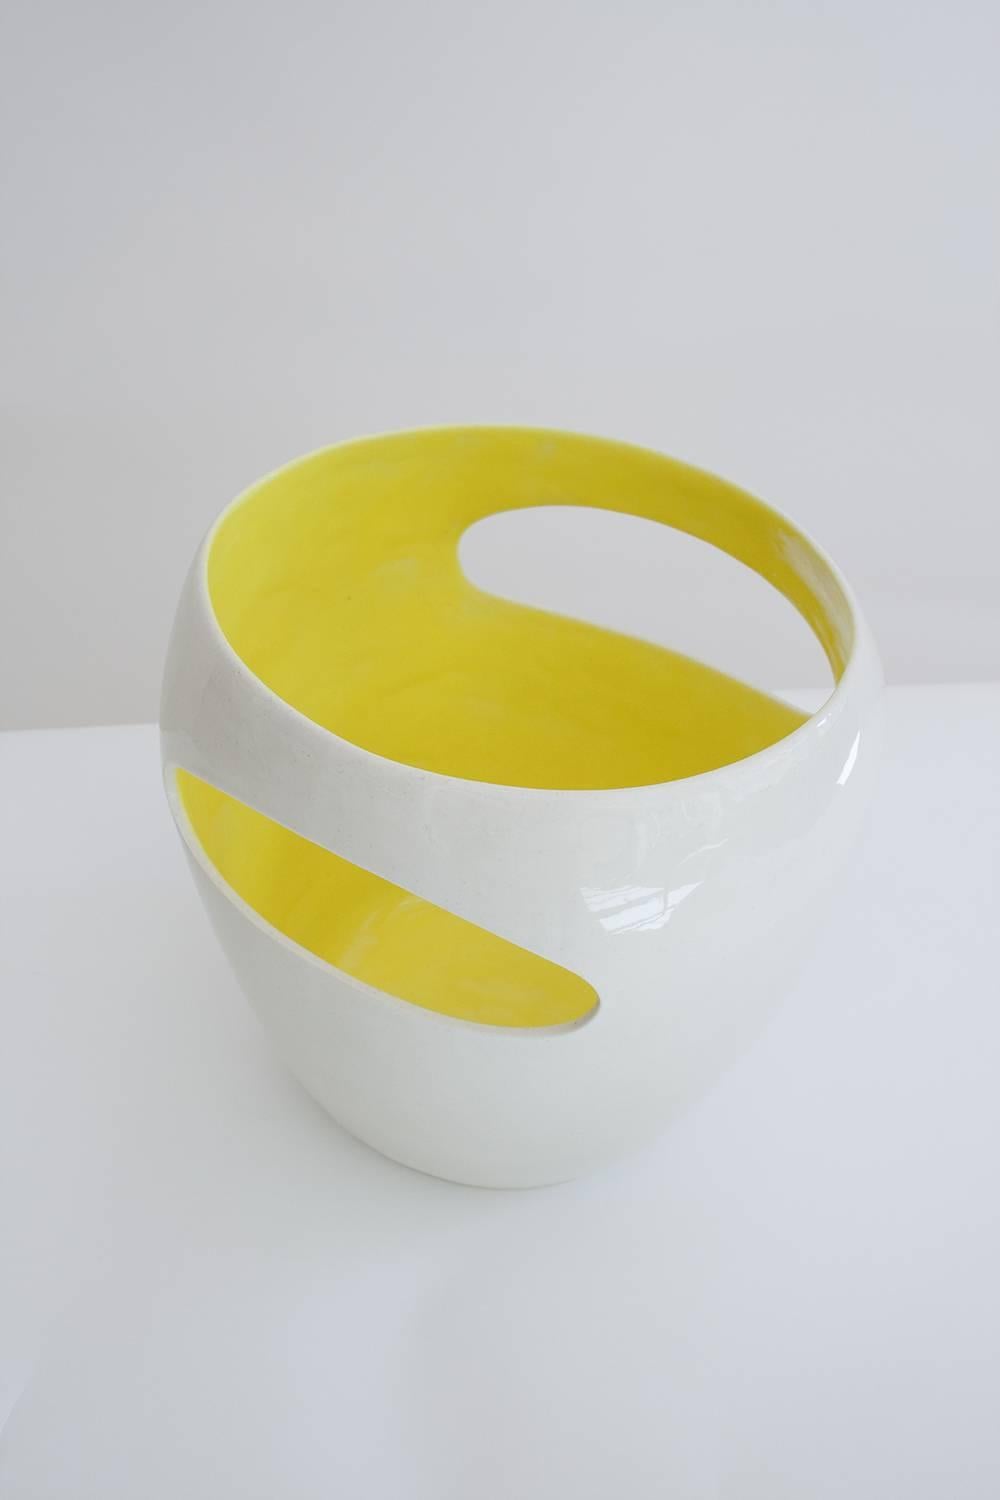 Swiss Schwyz, Porcelain Vase with Bright Yellow Enameled Interior by Philippe Cramer For Sale